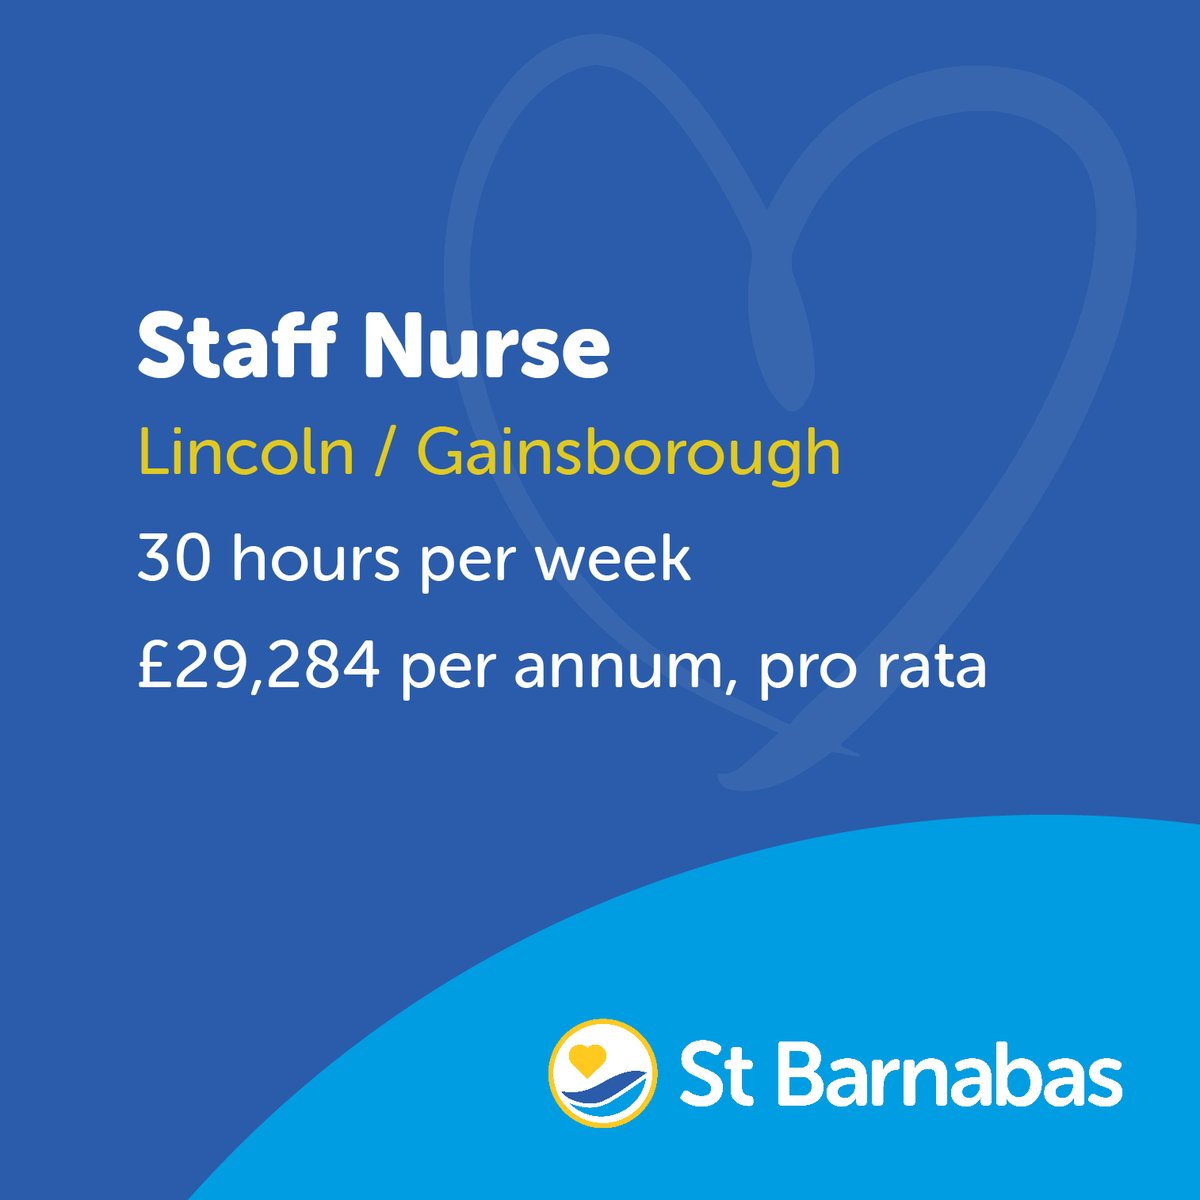 St Barnabas Hospice is an award-winning employer, ranking among the top charities to work for in the UK. We have a range of roles available in our clinical and non-clinical teams. If you would like to find out more, and apply visit stbarnabashospice.co.uk/careers/vacanc…